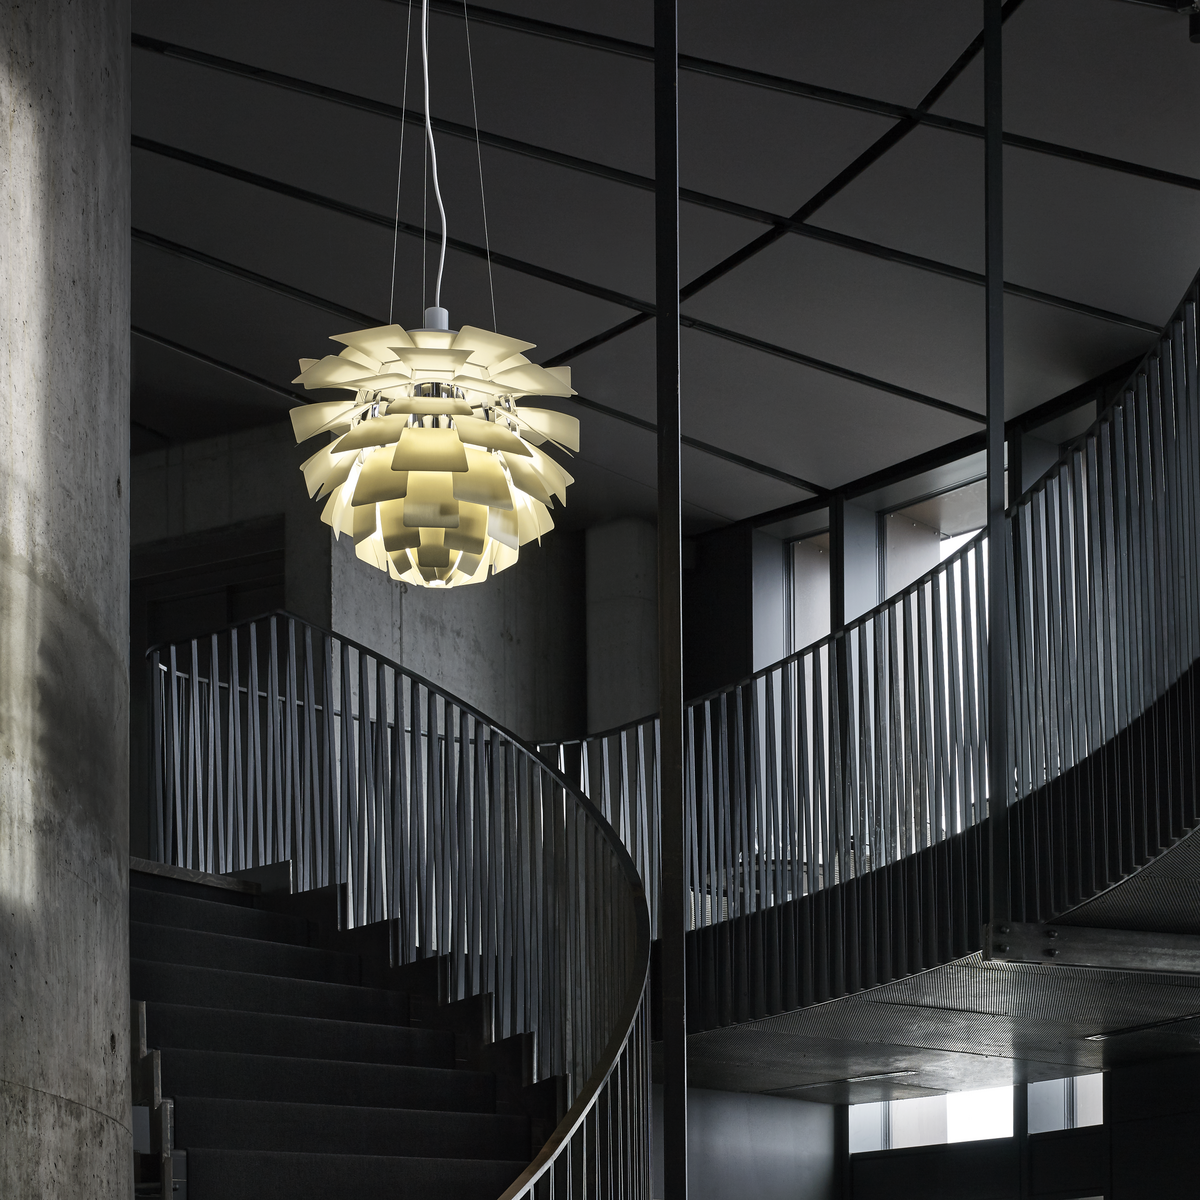 An elegant staircase and an iconic pendant.